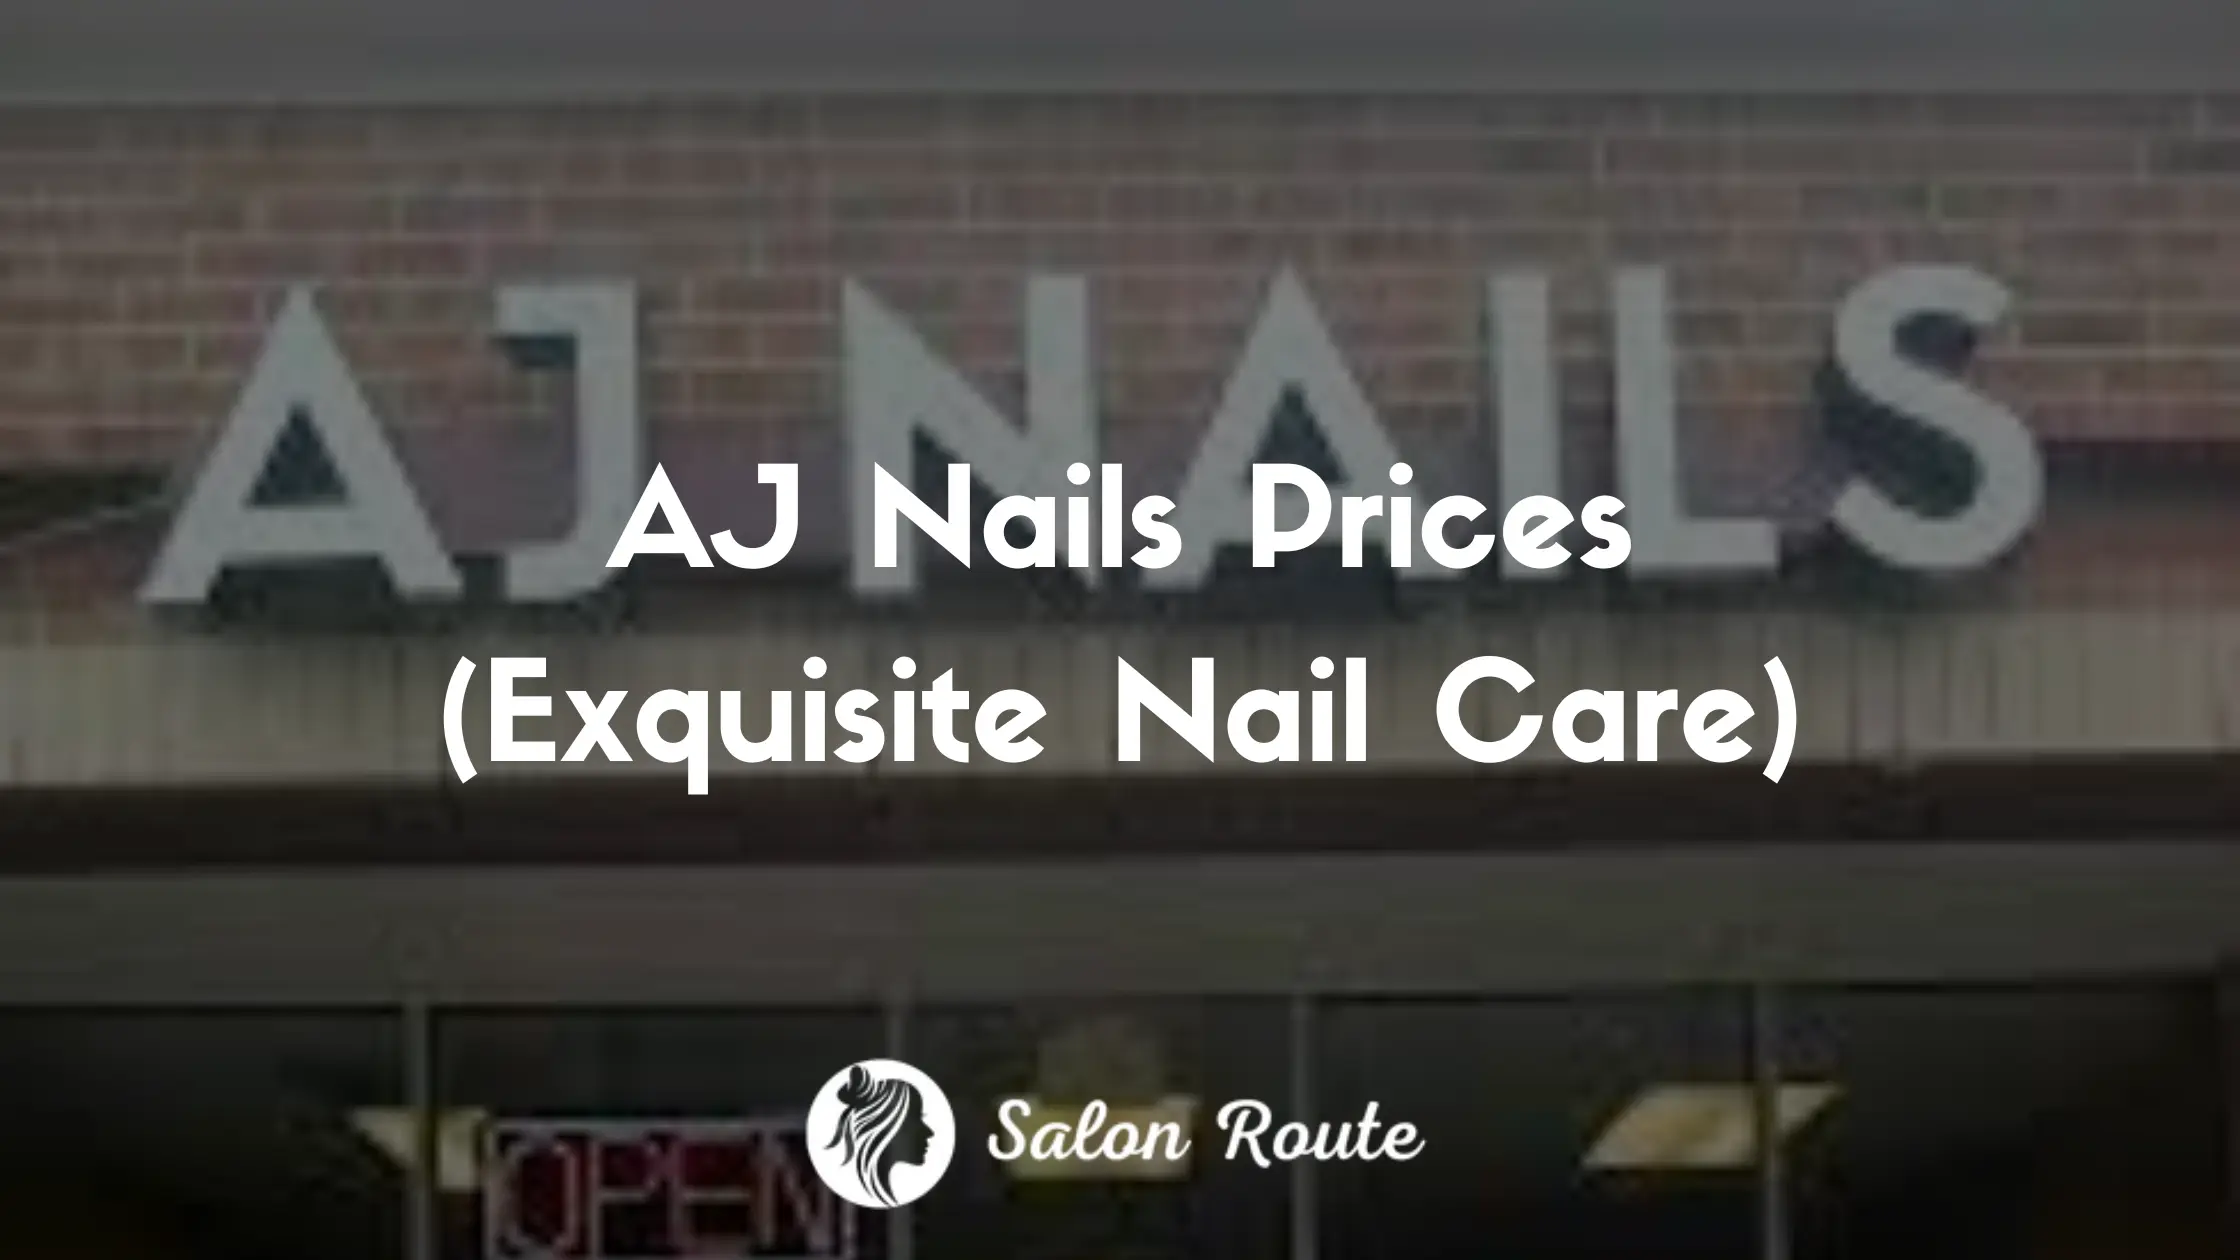 AJ Nails Prices (Exquisite Nail Care)